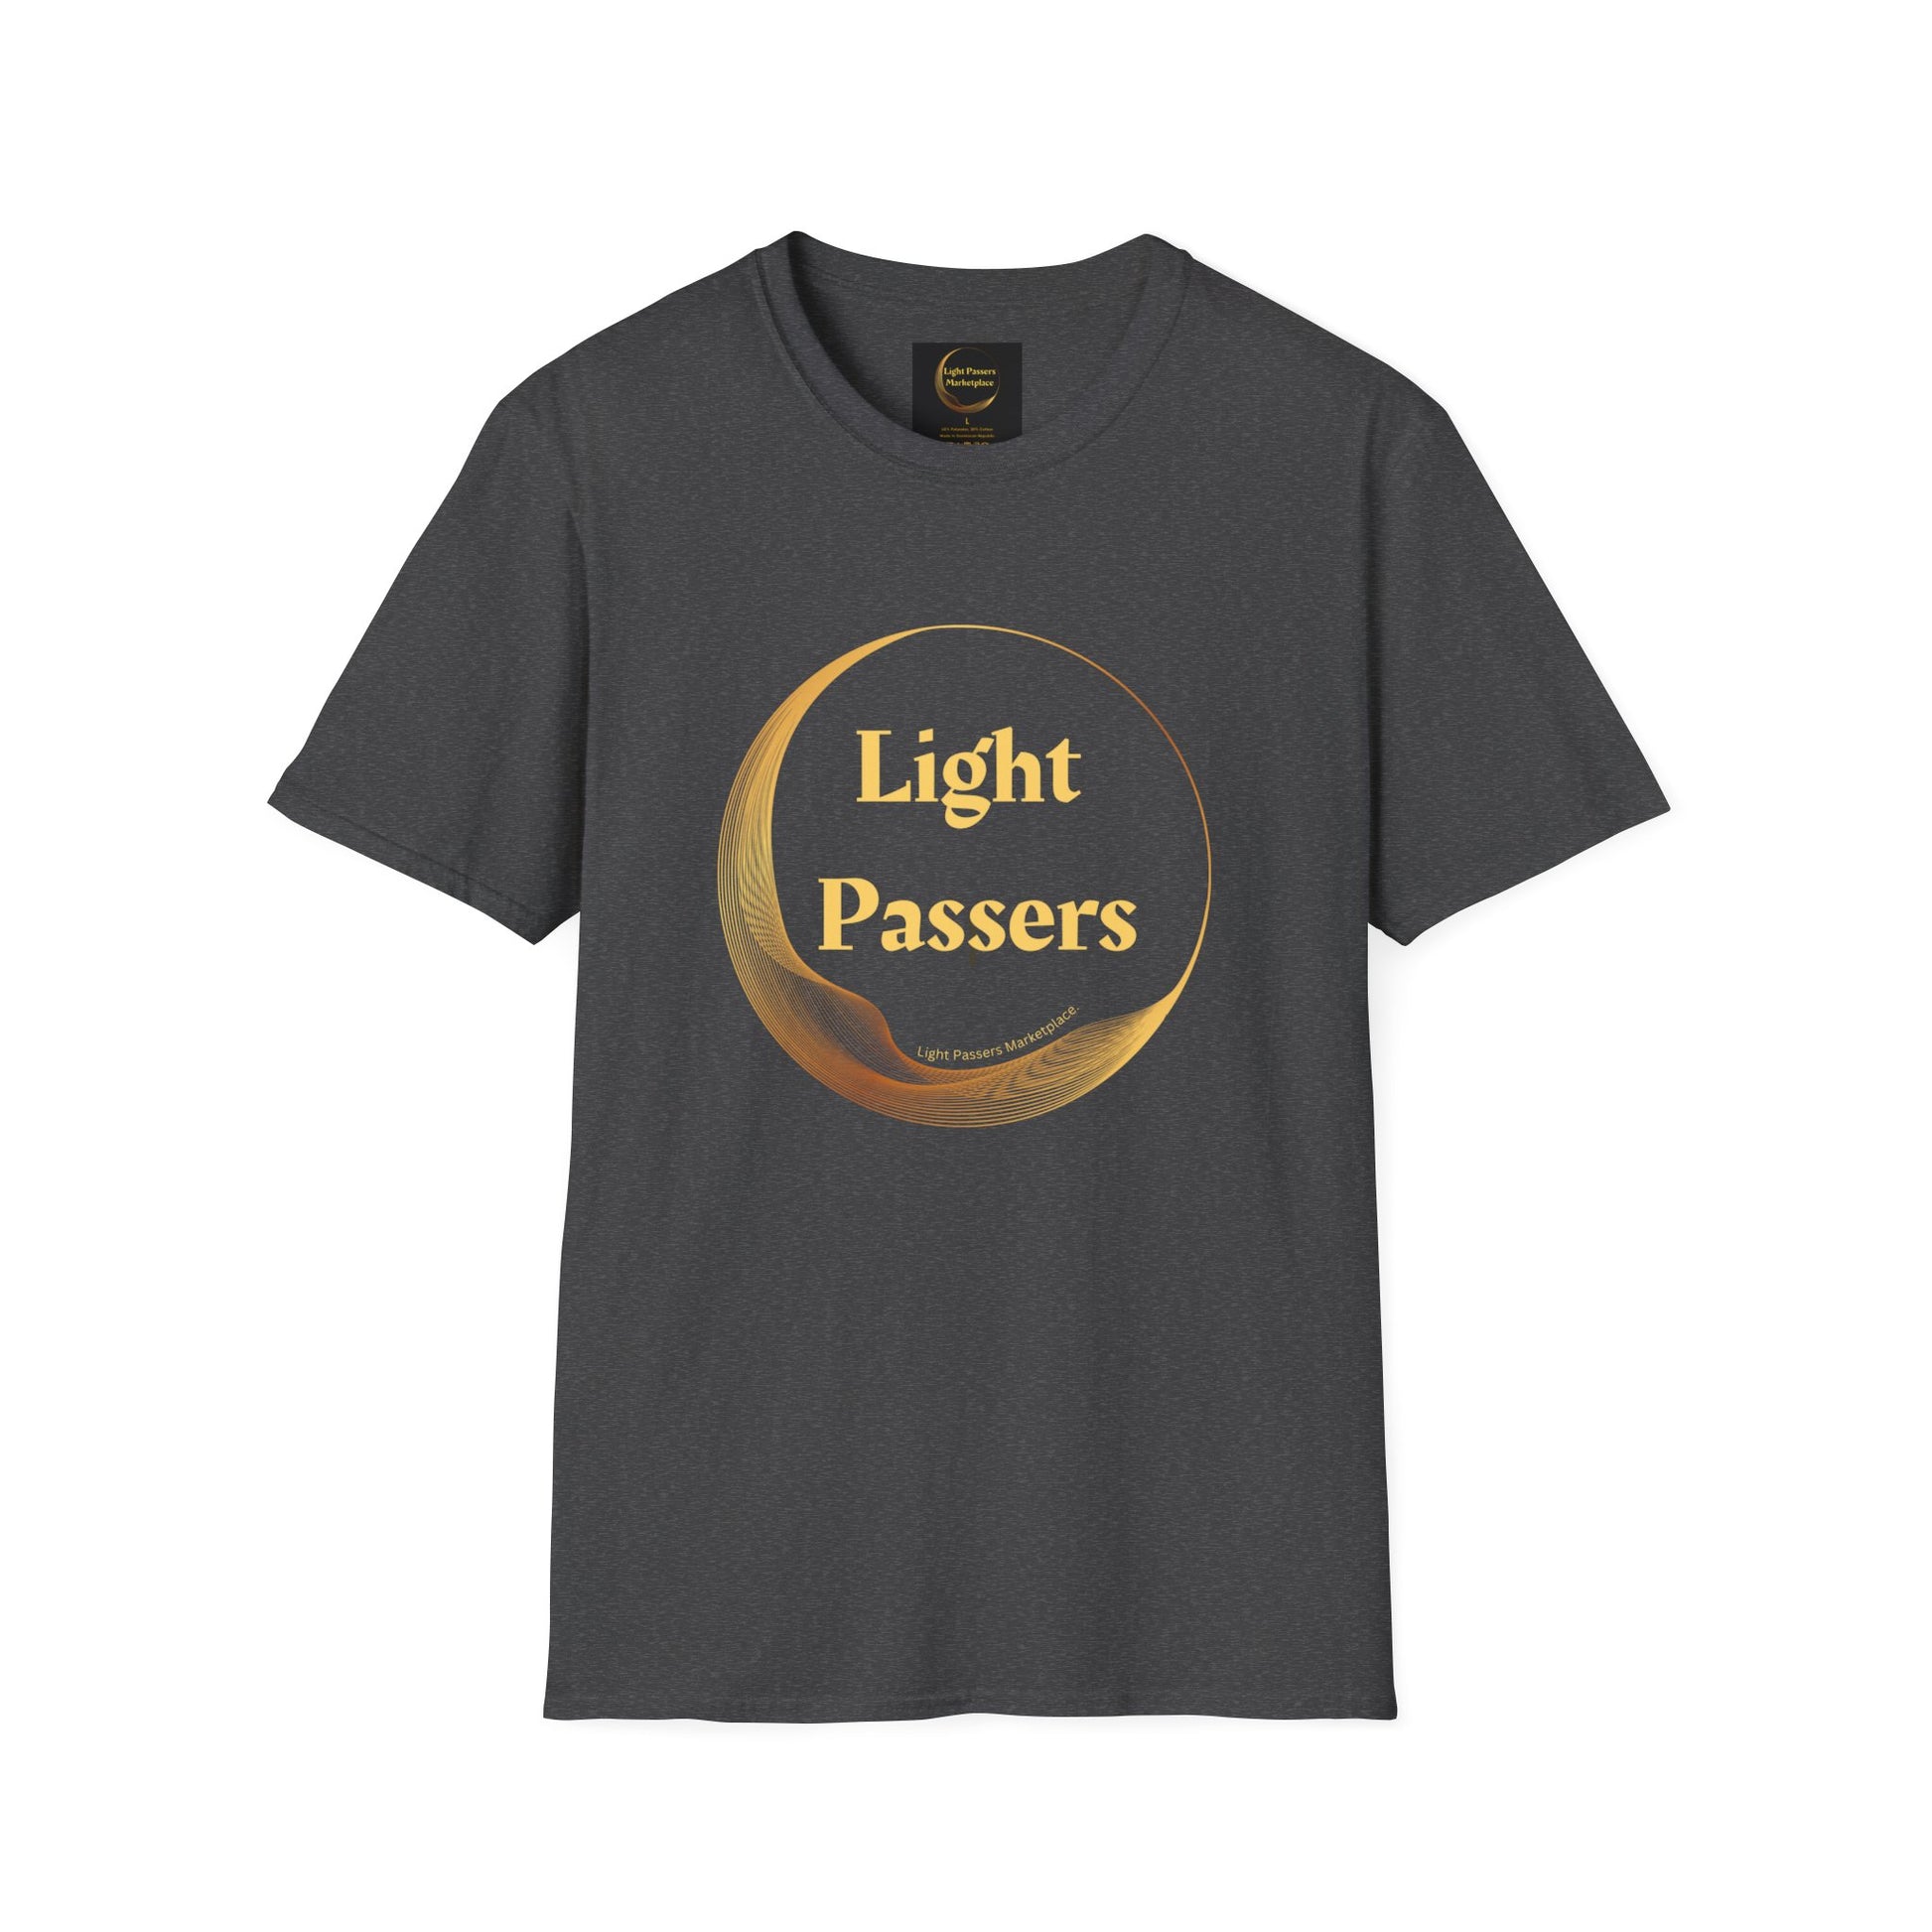 A black t-shirt featuring a gold logo design, showcasing a classic fit and durable construction. Made of 100% cotton with smooth surface for vivid printing. No side seams for added comfort.